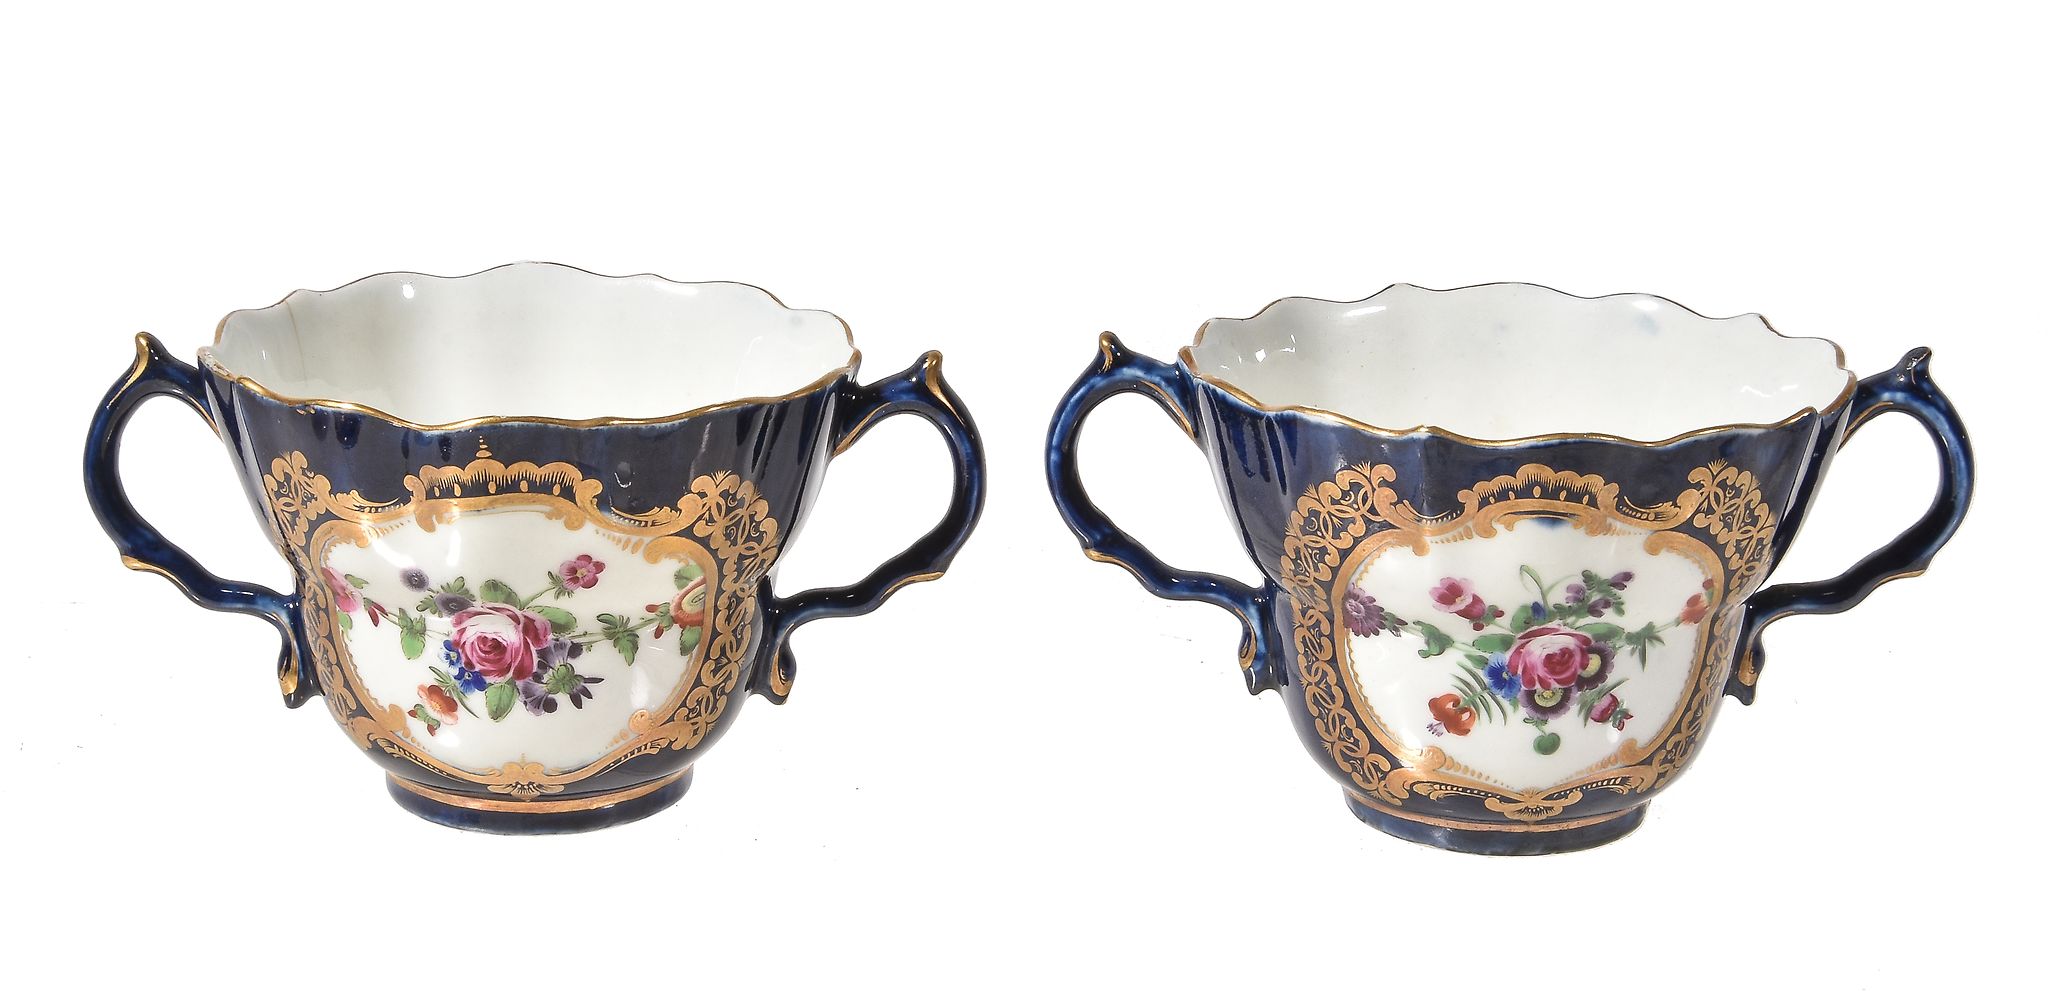 A pair of Worcester blue-ground two-handled chocolate cups, covers and stands, circa 1770, painted - Image 4 of 6